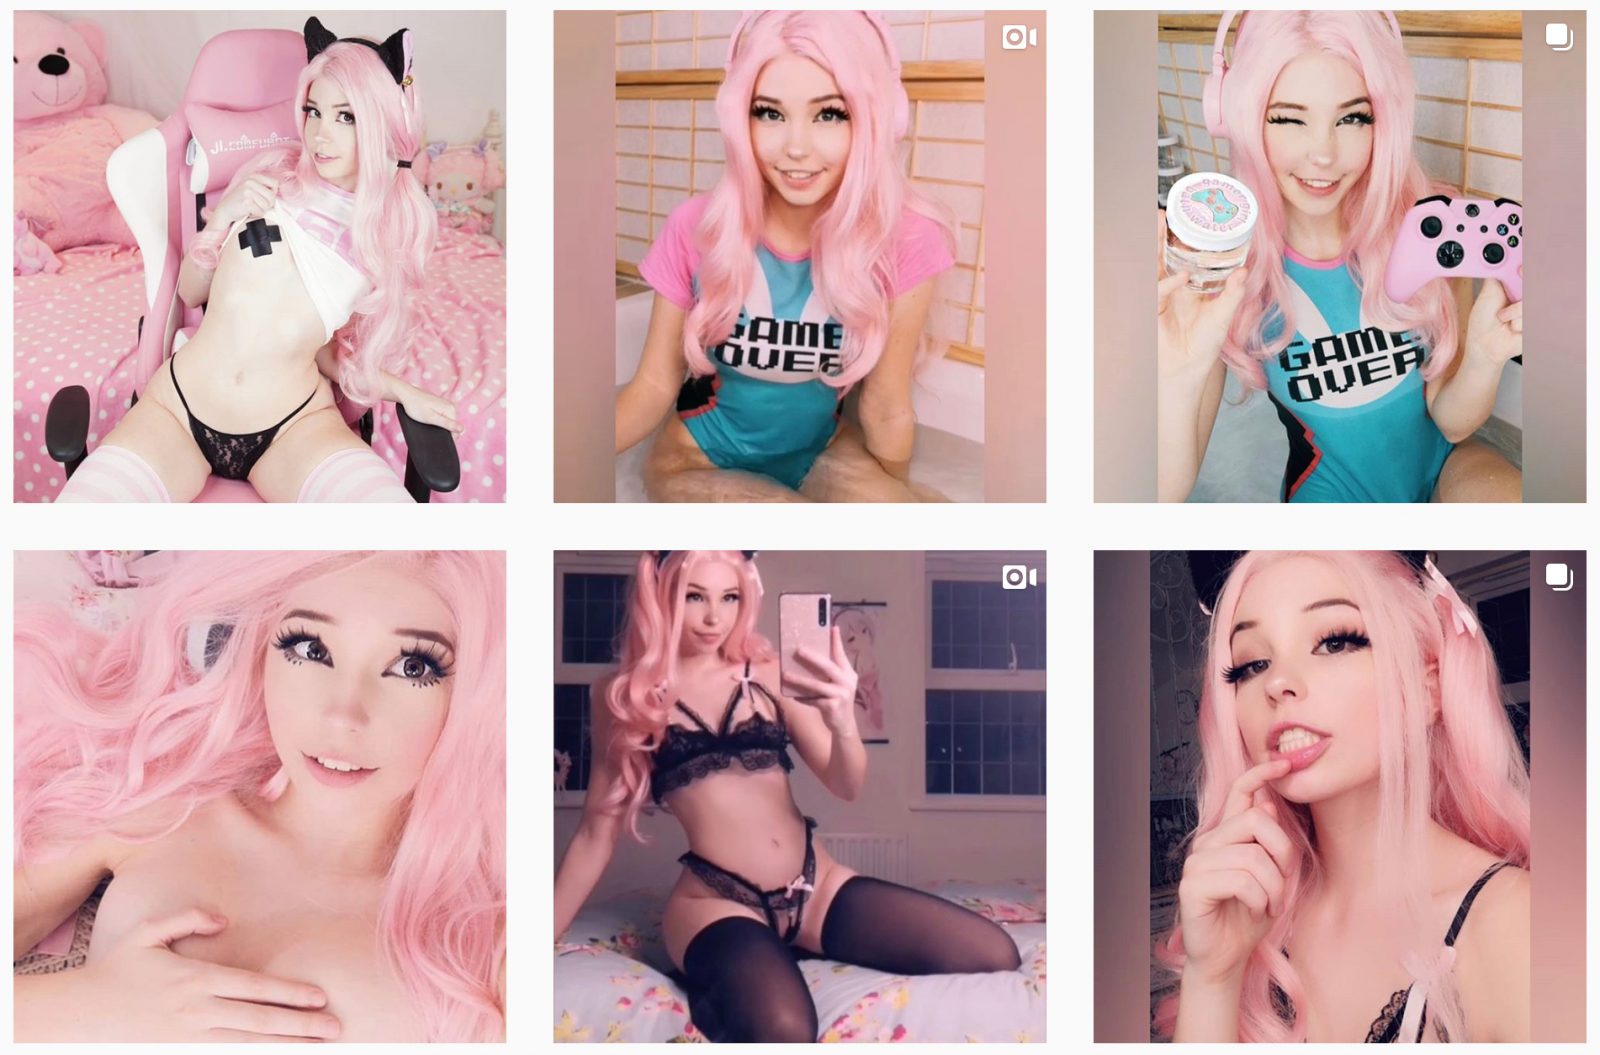 Belle delphine being fucked